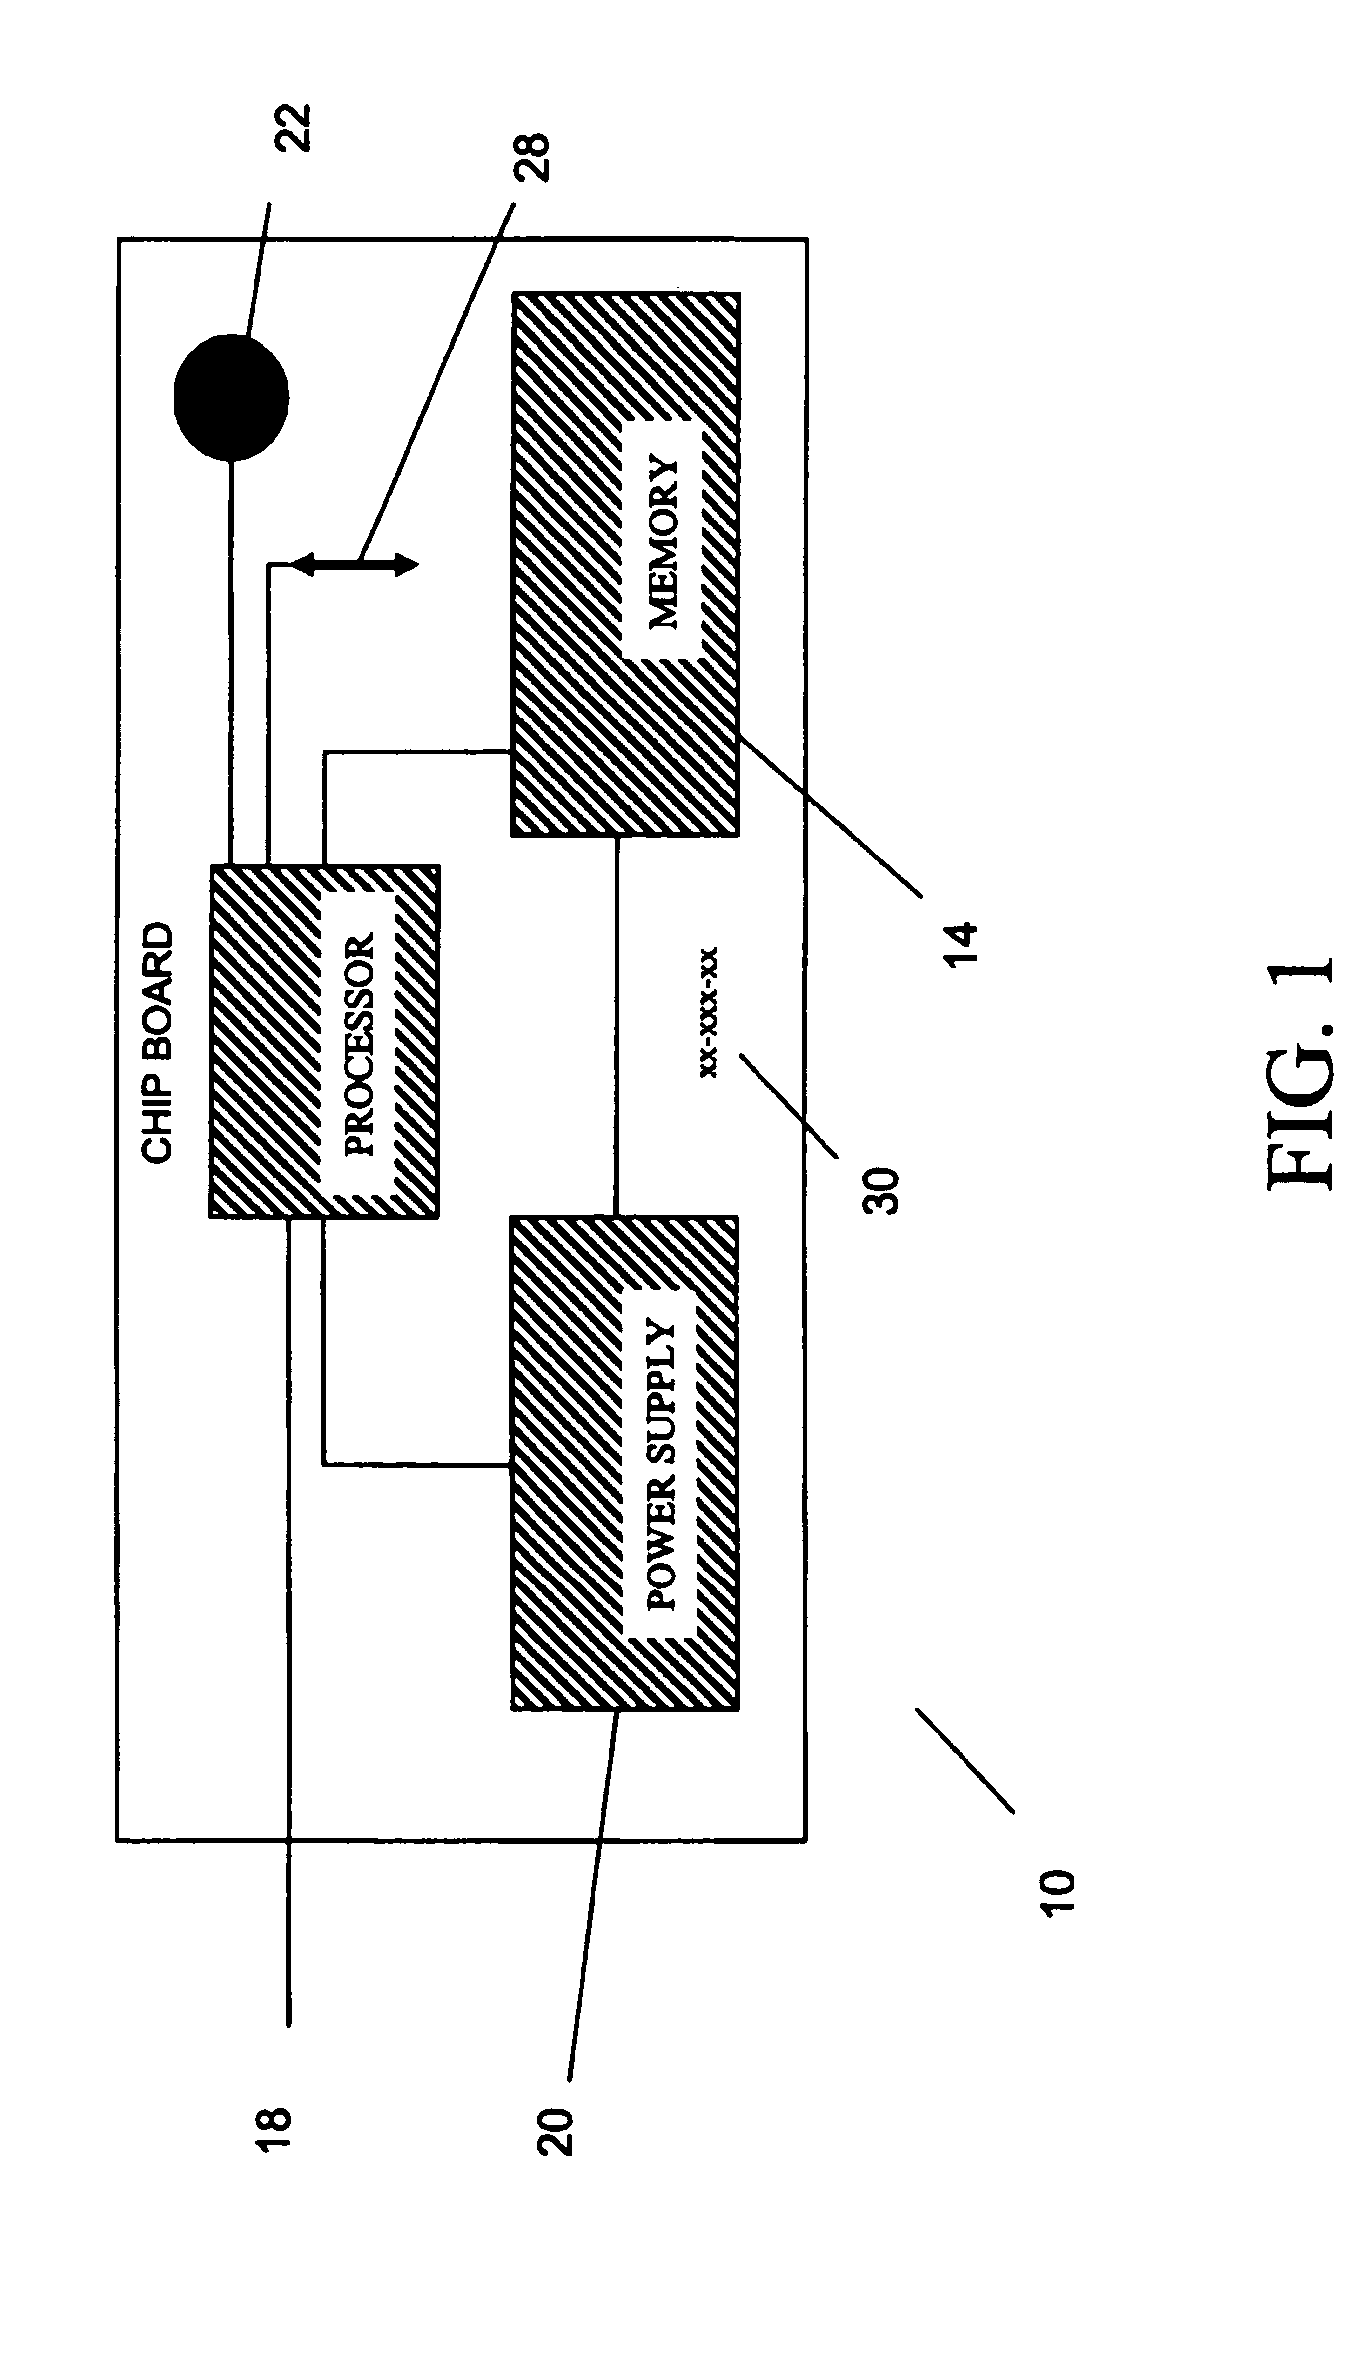 Method and apparatus for determining chemistry of part's residual contamination